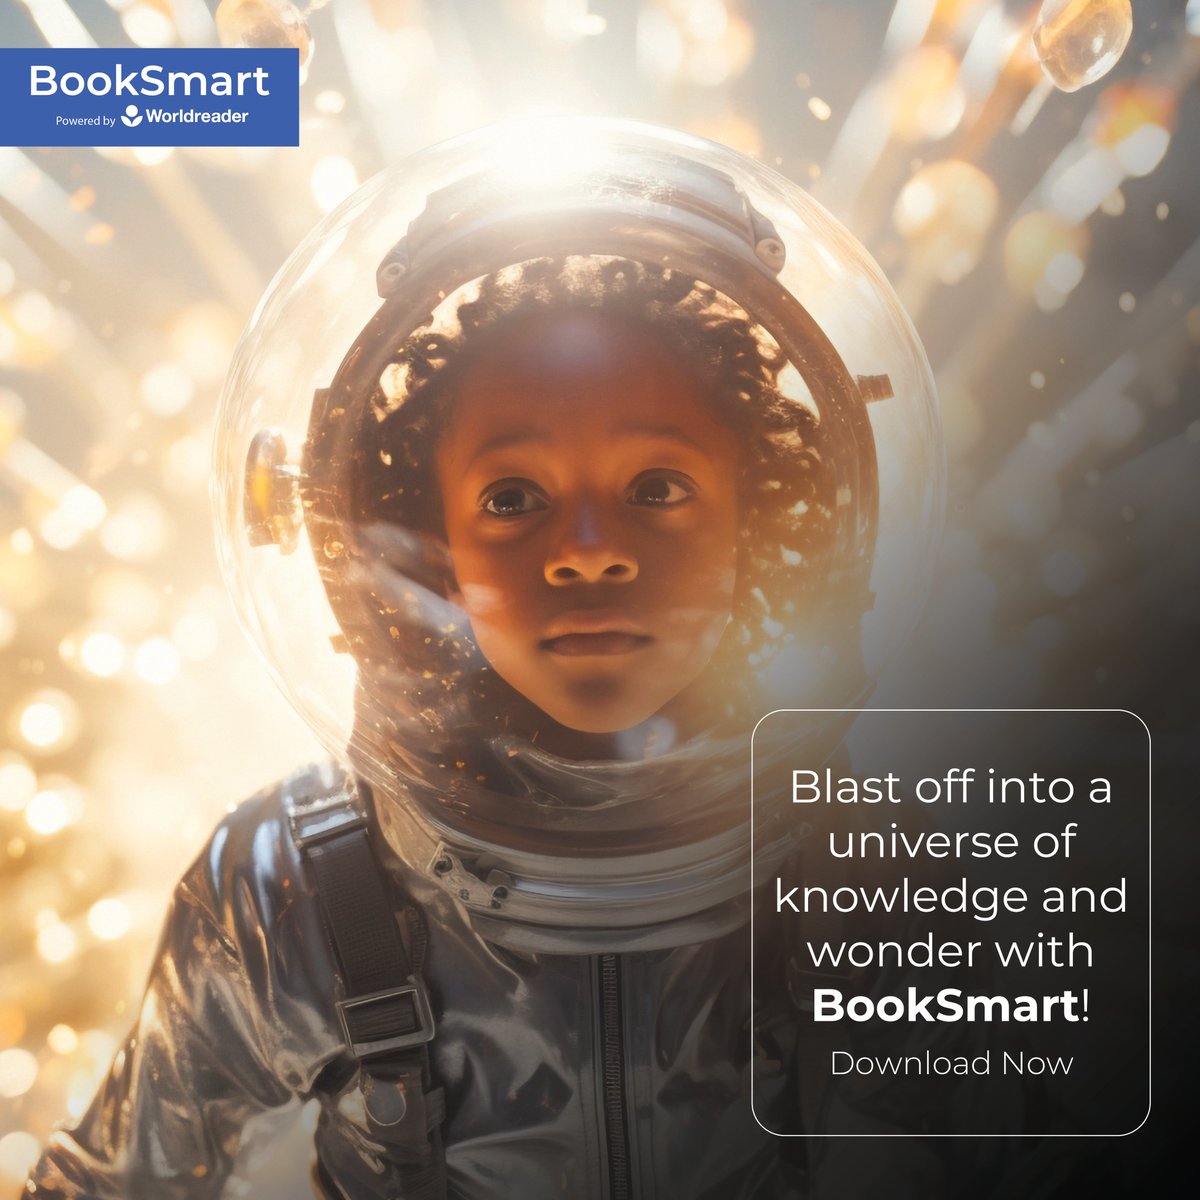 🚀📚 Blast off into a universe of knowledge and wonder with BookSmart! Fuel your child's curiosity with our diverse library of online books. Let the reading journey take flight! 🌠📖
Download Now: booksmart.worldreader.org
#BookSmart #ReadingAdventure